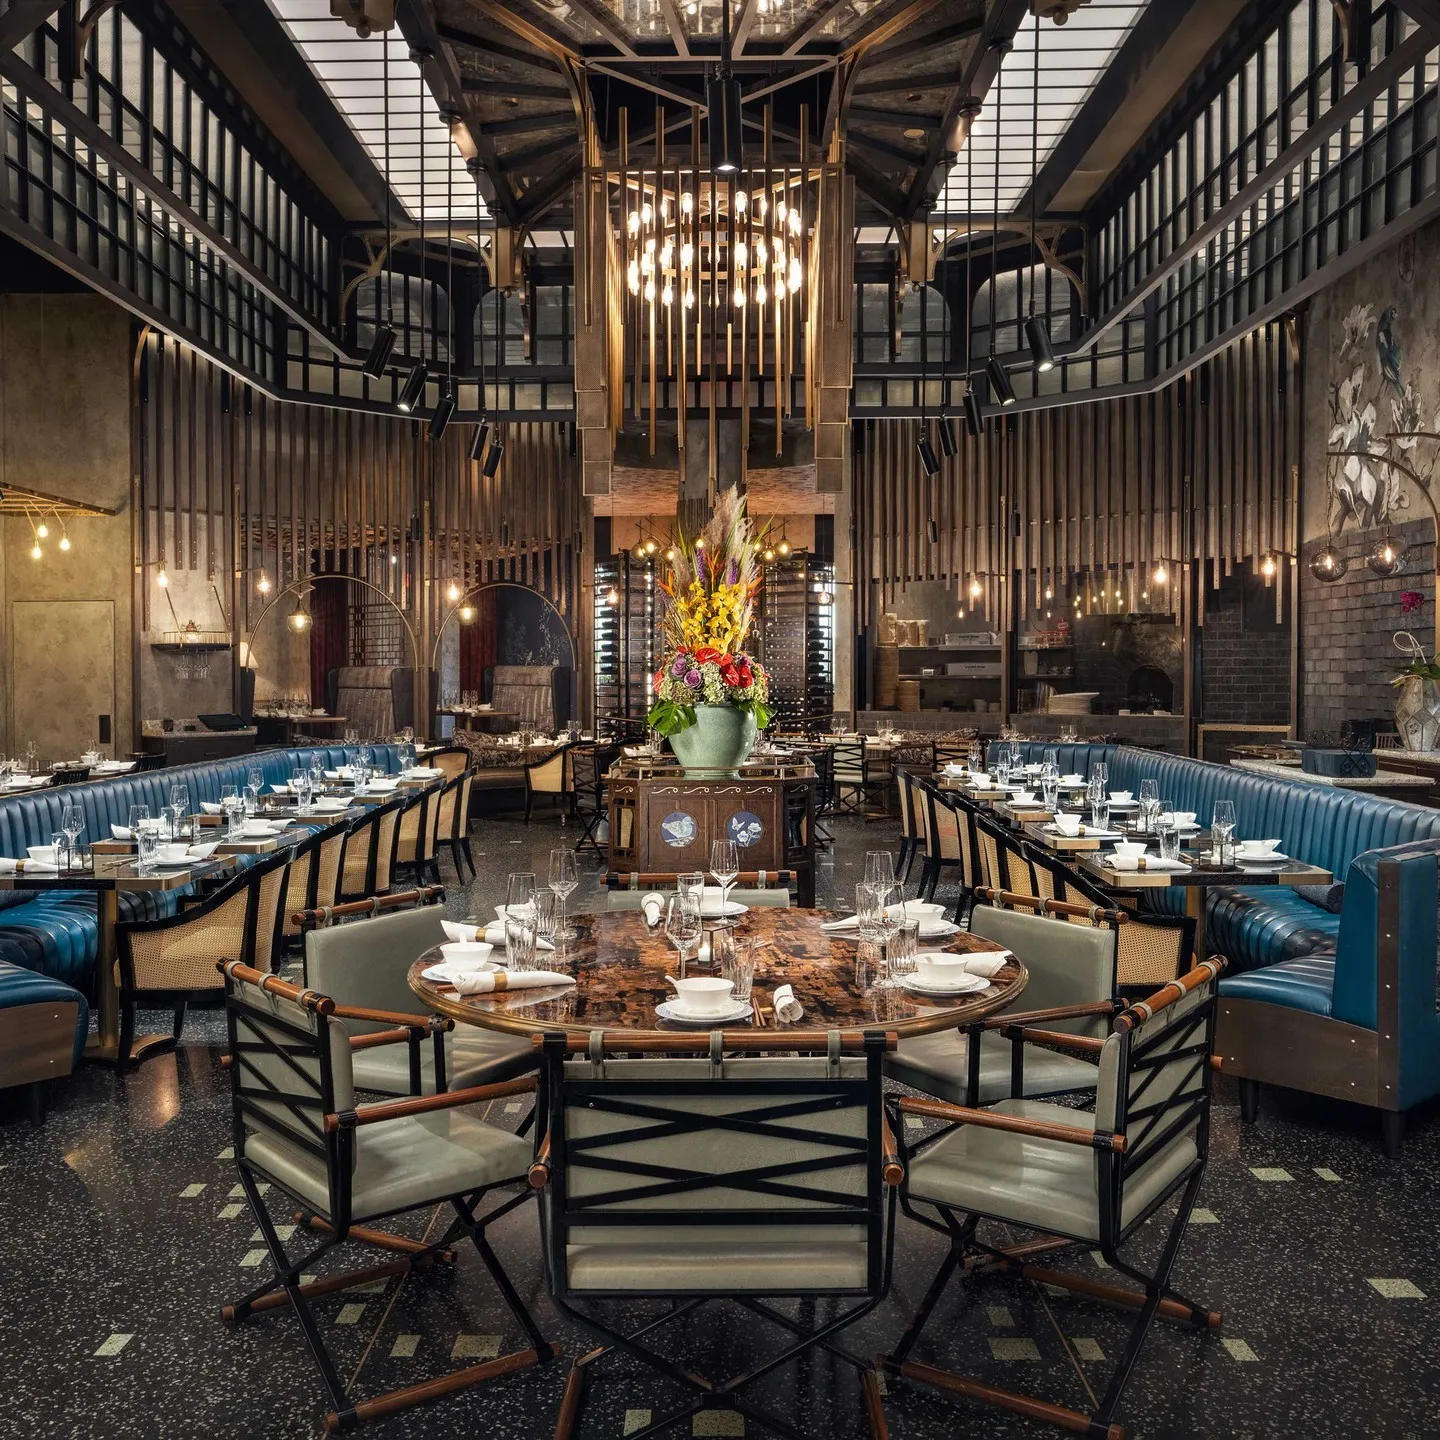 image  1 The Palazzo Las Vegas - It's always a good time for dim sum at #mott32vegas